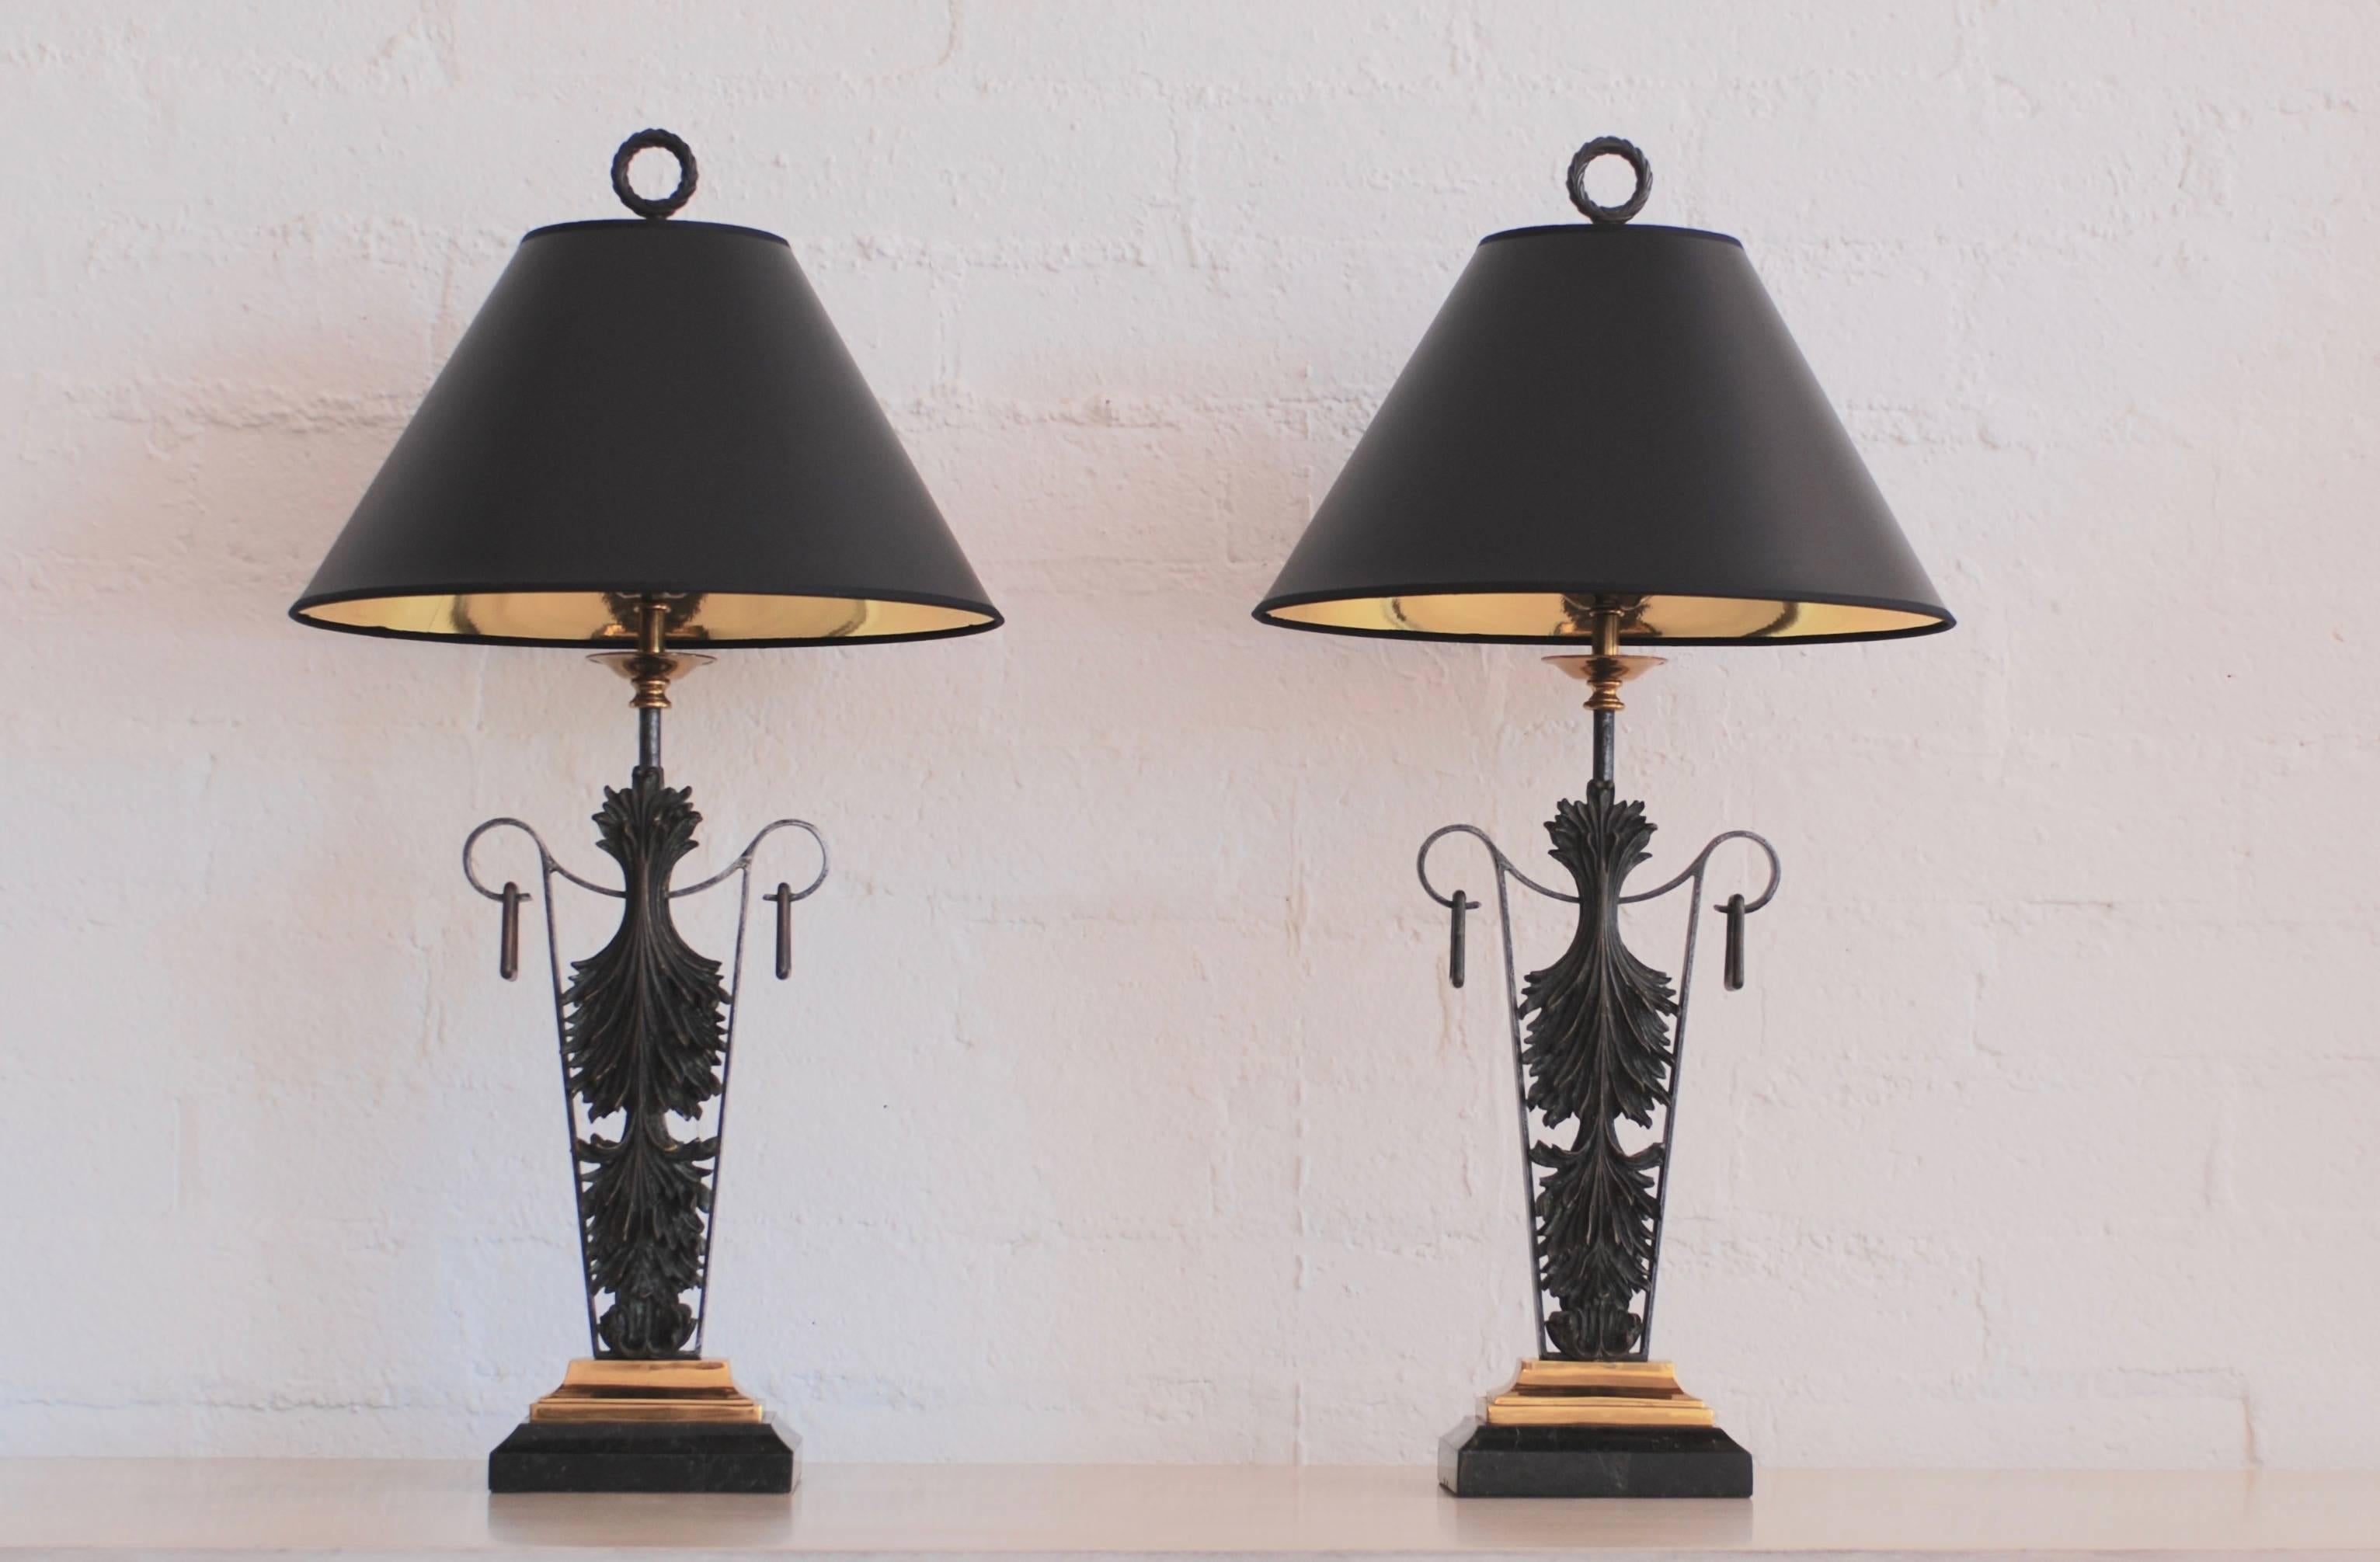 A superb set of bronze neoclassical table lamps by Maitland-Smith set on a brass and dark marble base. These table lamps have graceful classic proportions and come with black paper shades lined with gold interior for a warm glow. The finials are a